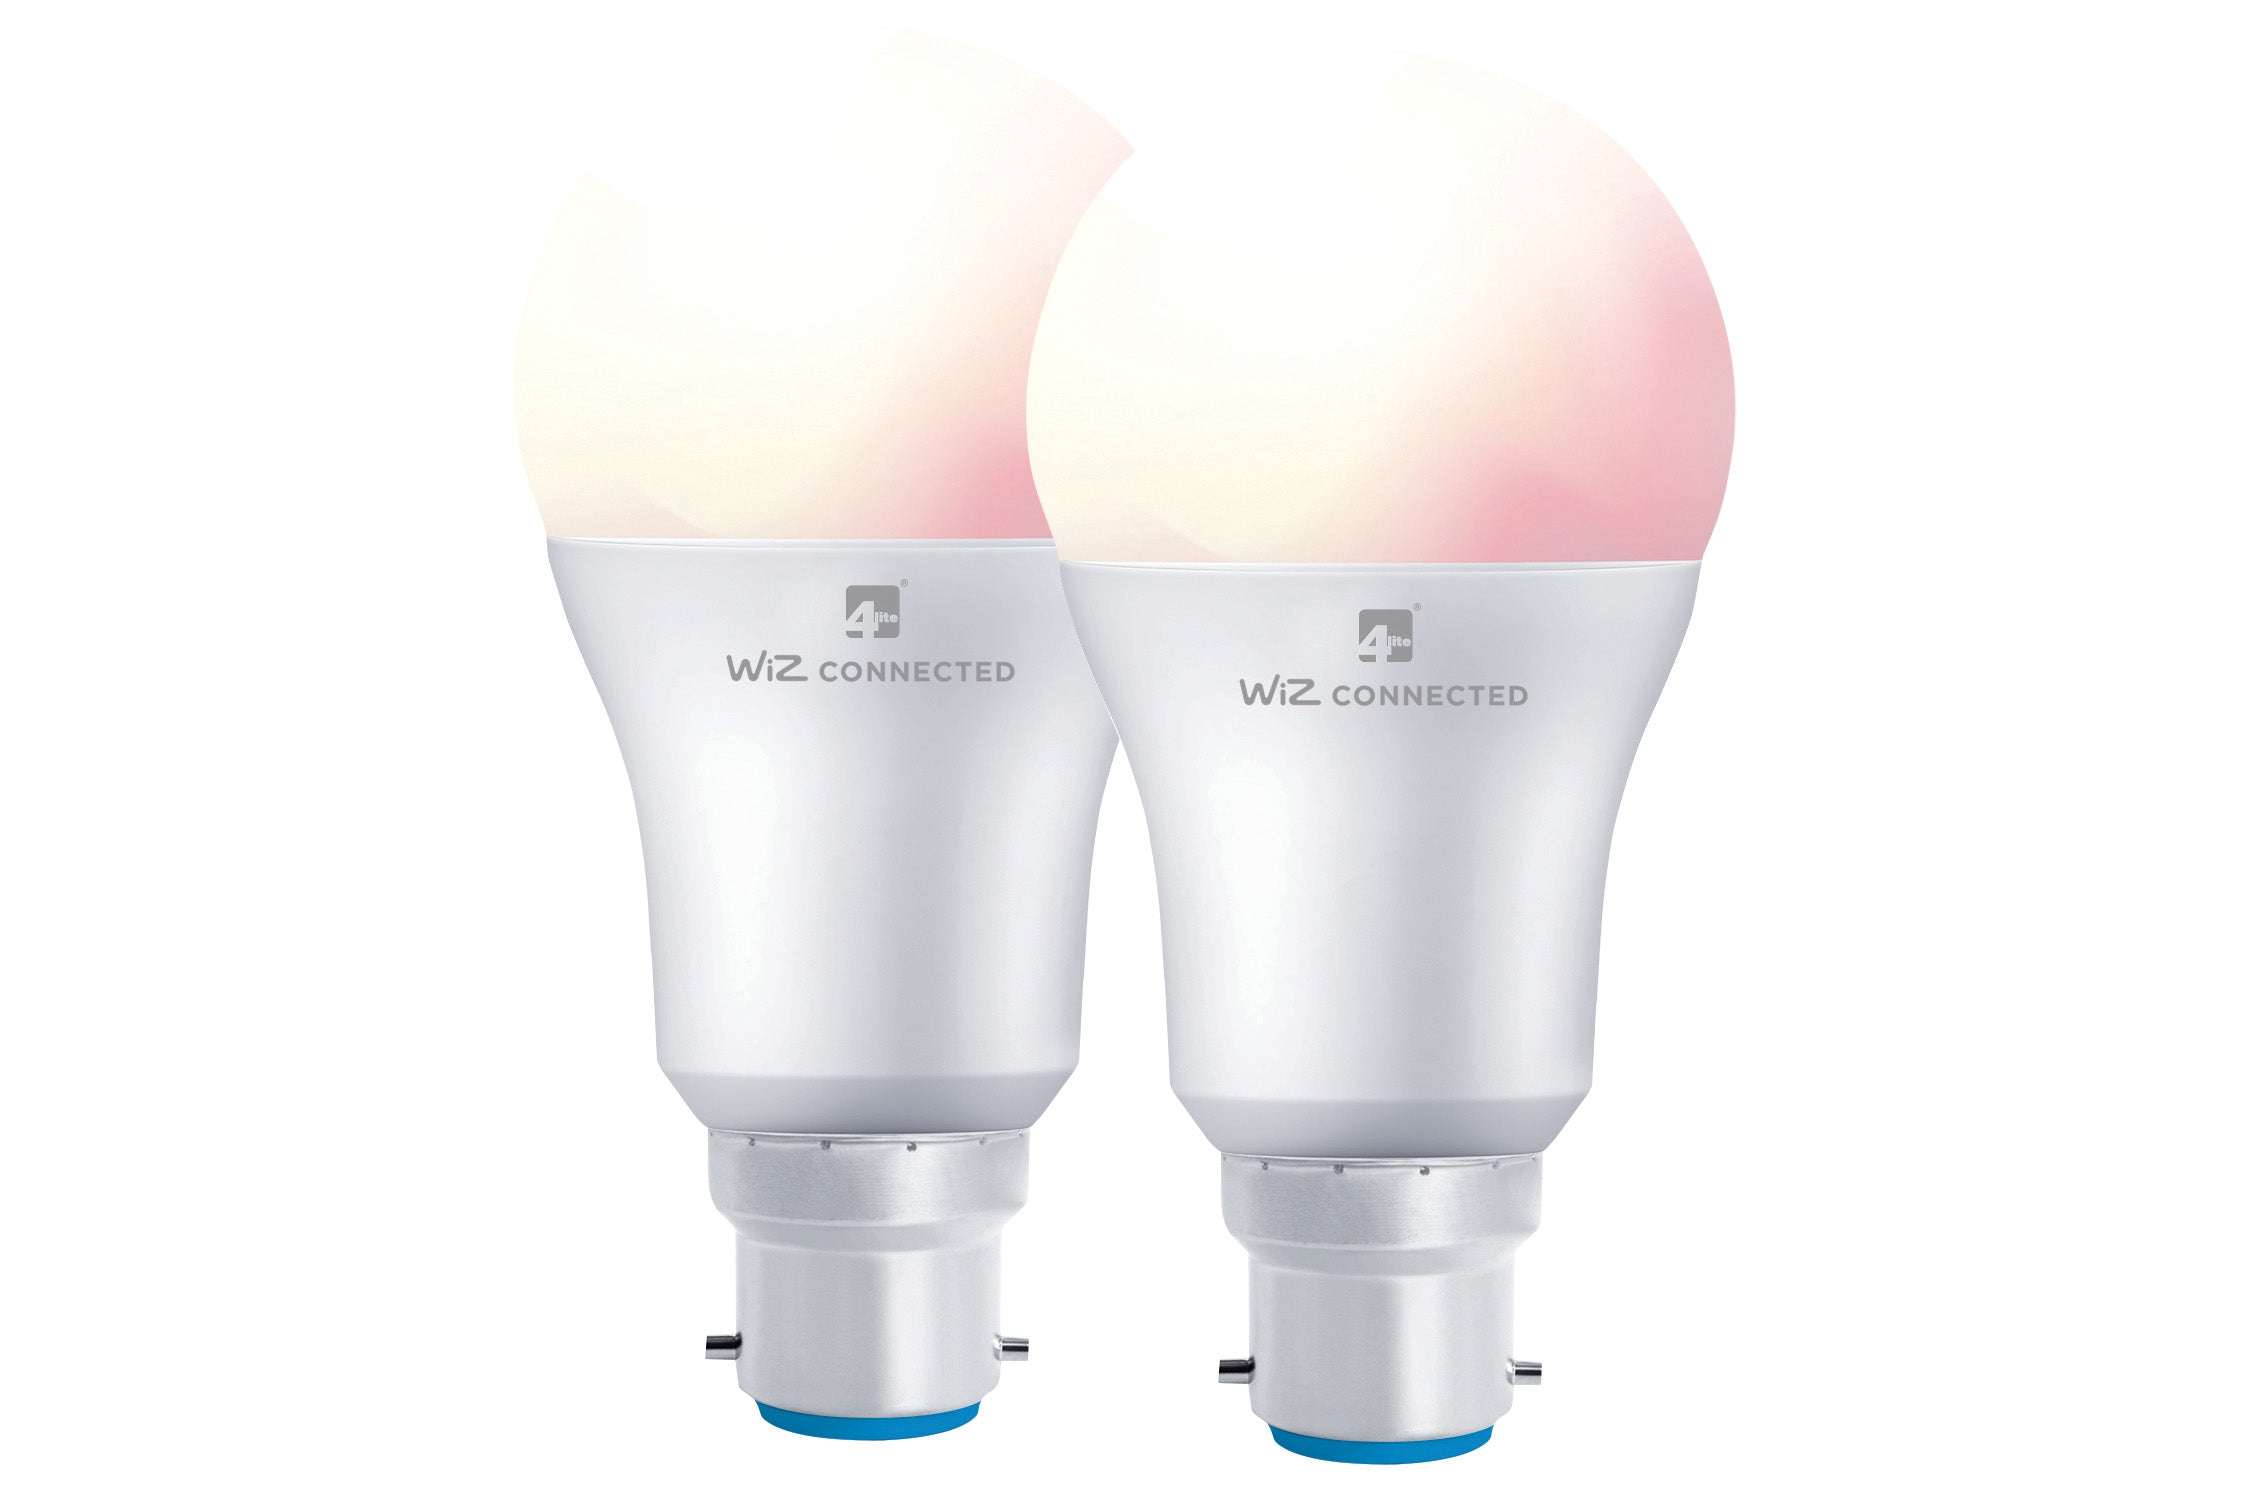 4lite WiZ Connected A60 Dimmable Multicolour WiFi LED Smart Bulb - B22 Bayonet (Pack of 2)